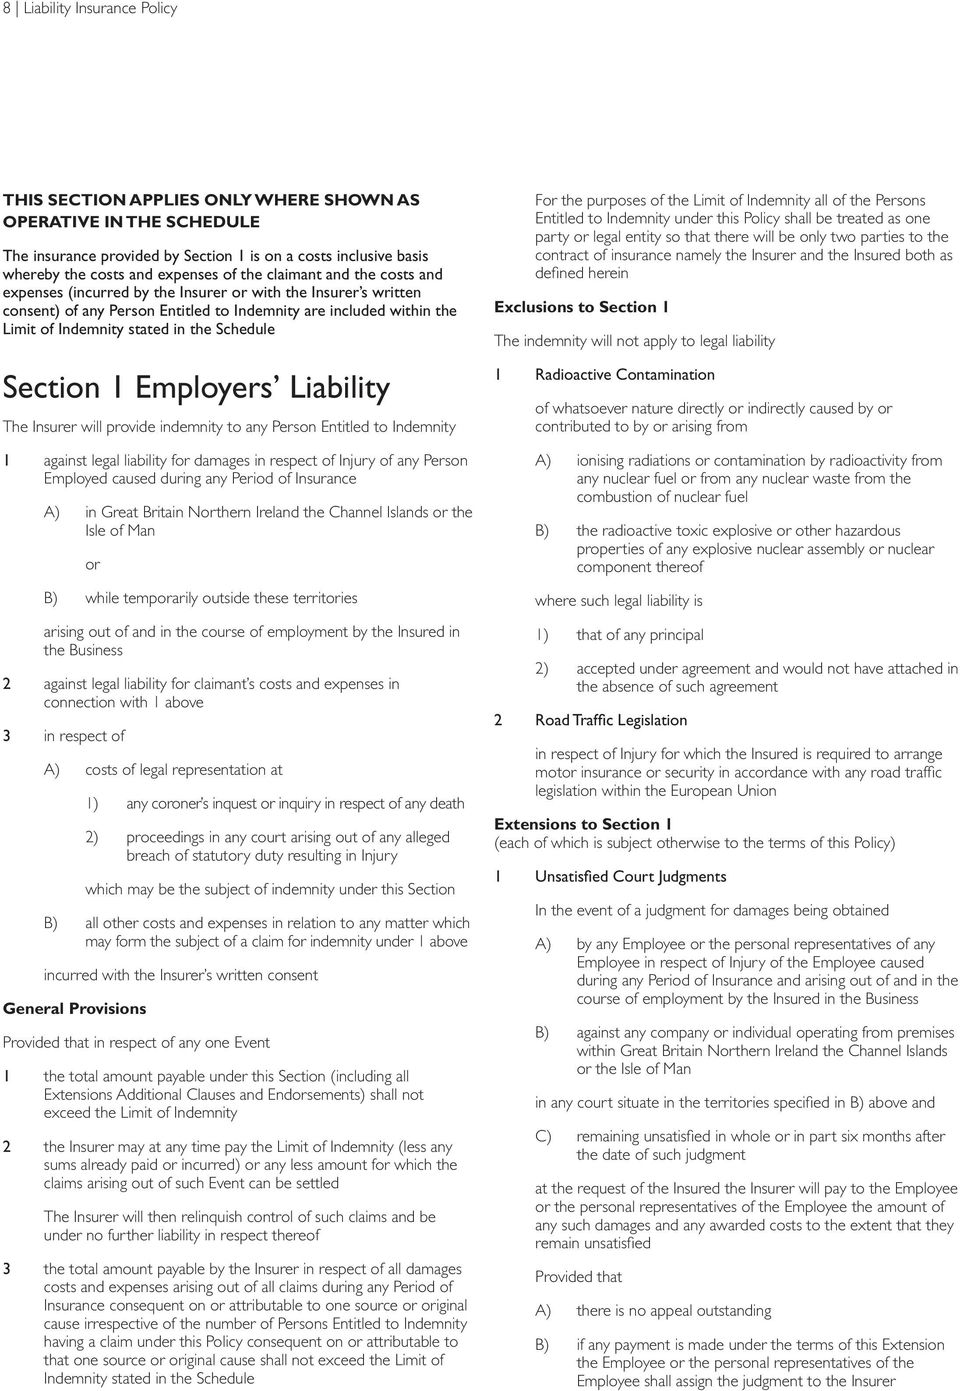 Schedule Section 1 Employers Liability The Insurer will provide indemnity to any Person Entitled to Indemnity 1 against legal liability for damages in respect of Injury of any Person Employed caused